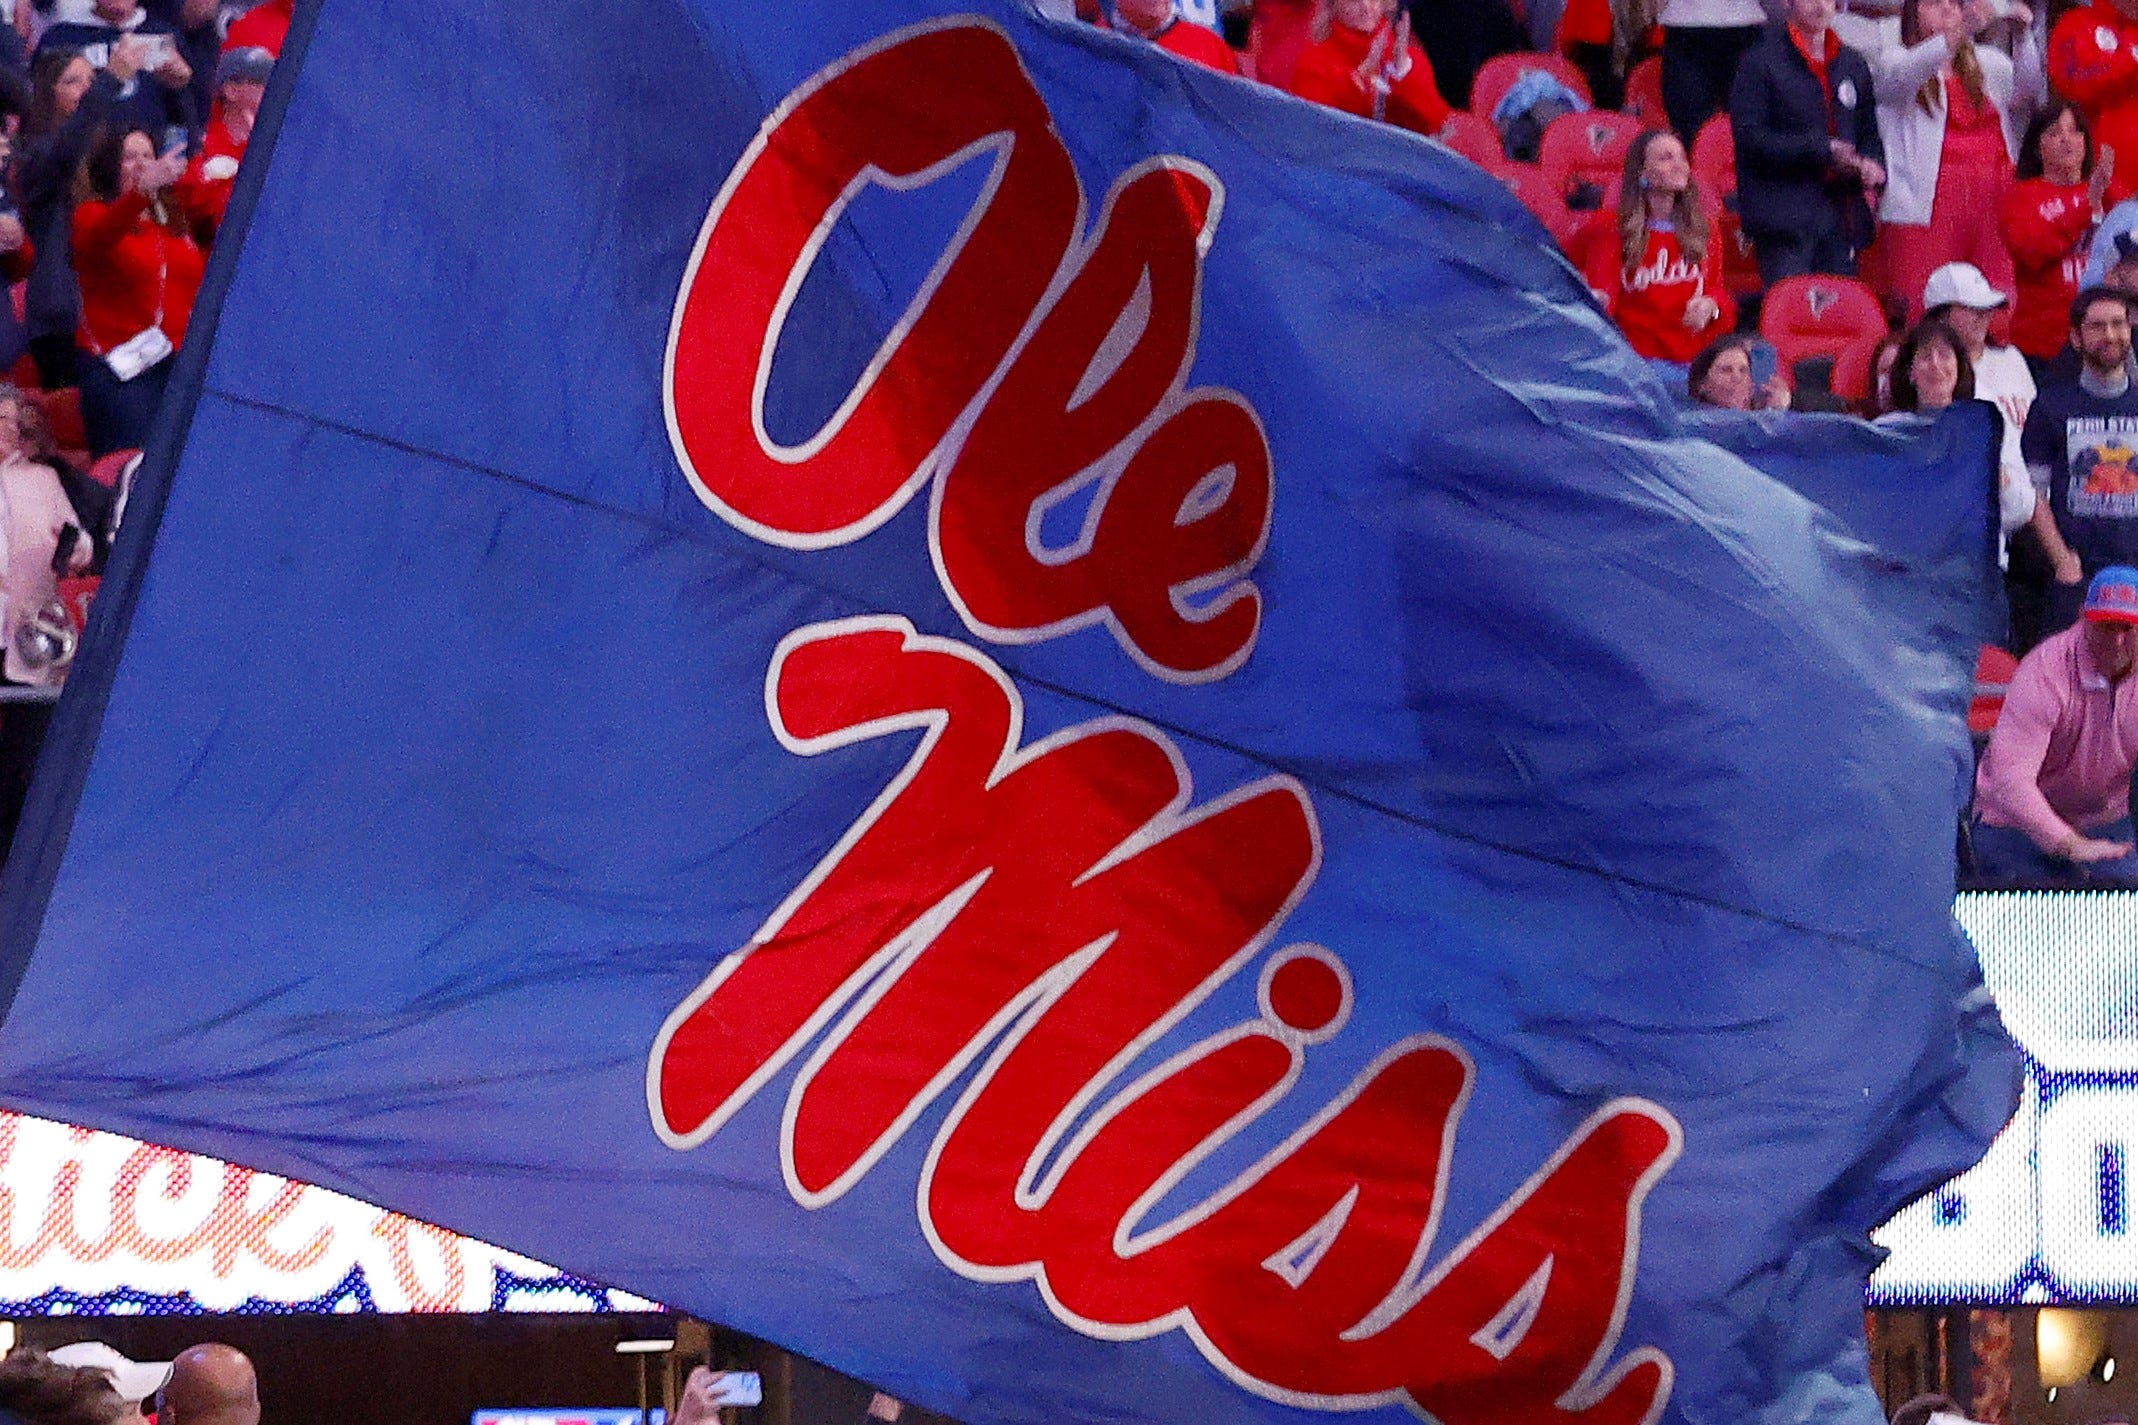 ole miss investigates 'racist overtones' as black student taunted at pro-palestine protest